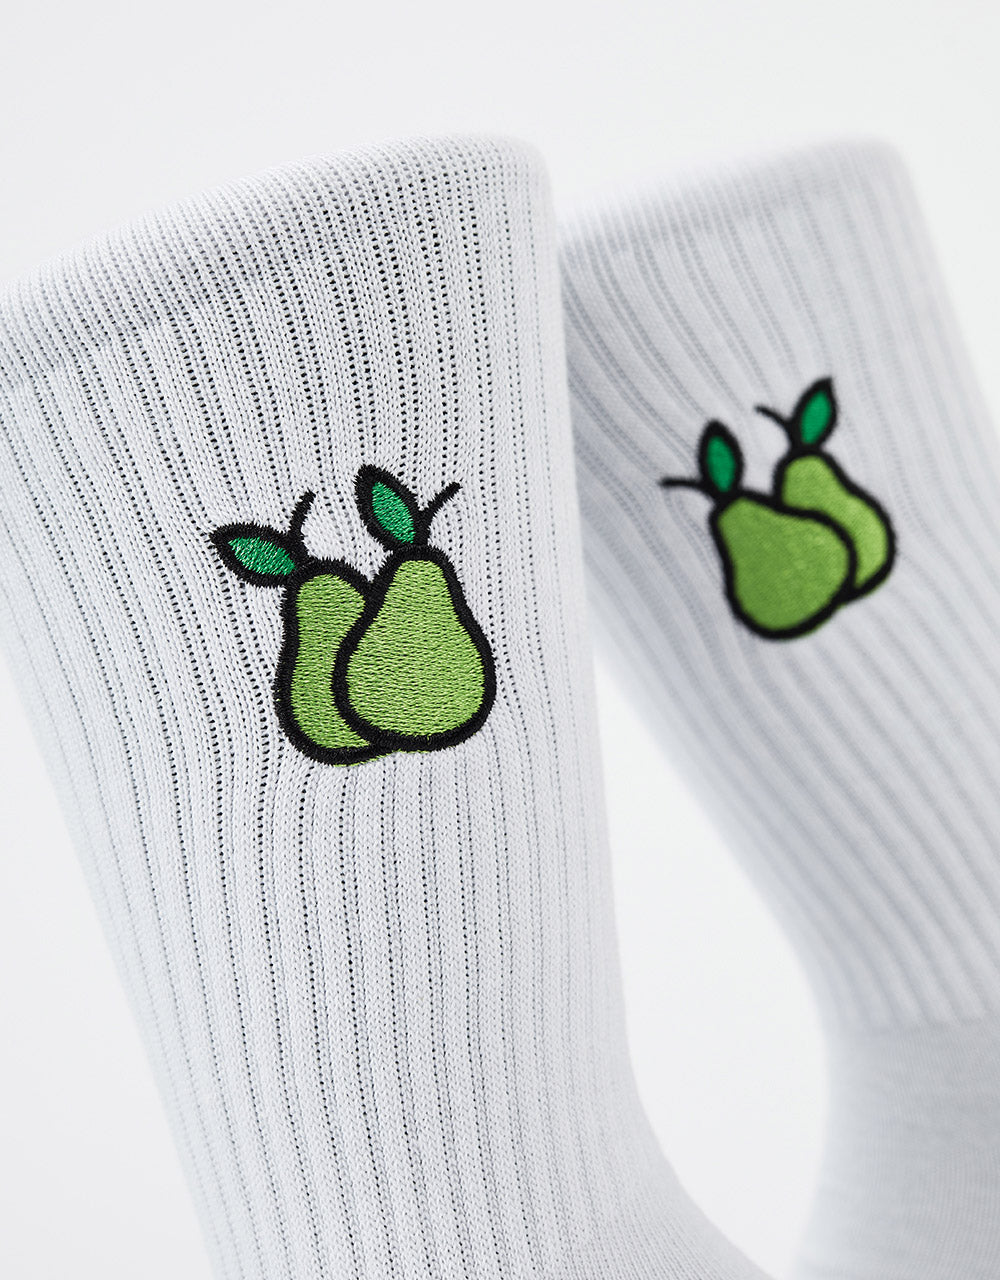 Route One Nice Pear Socks - White